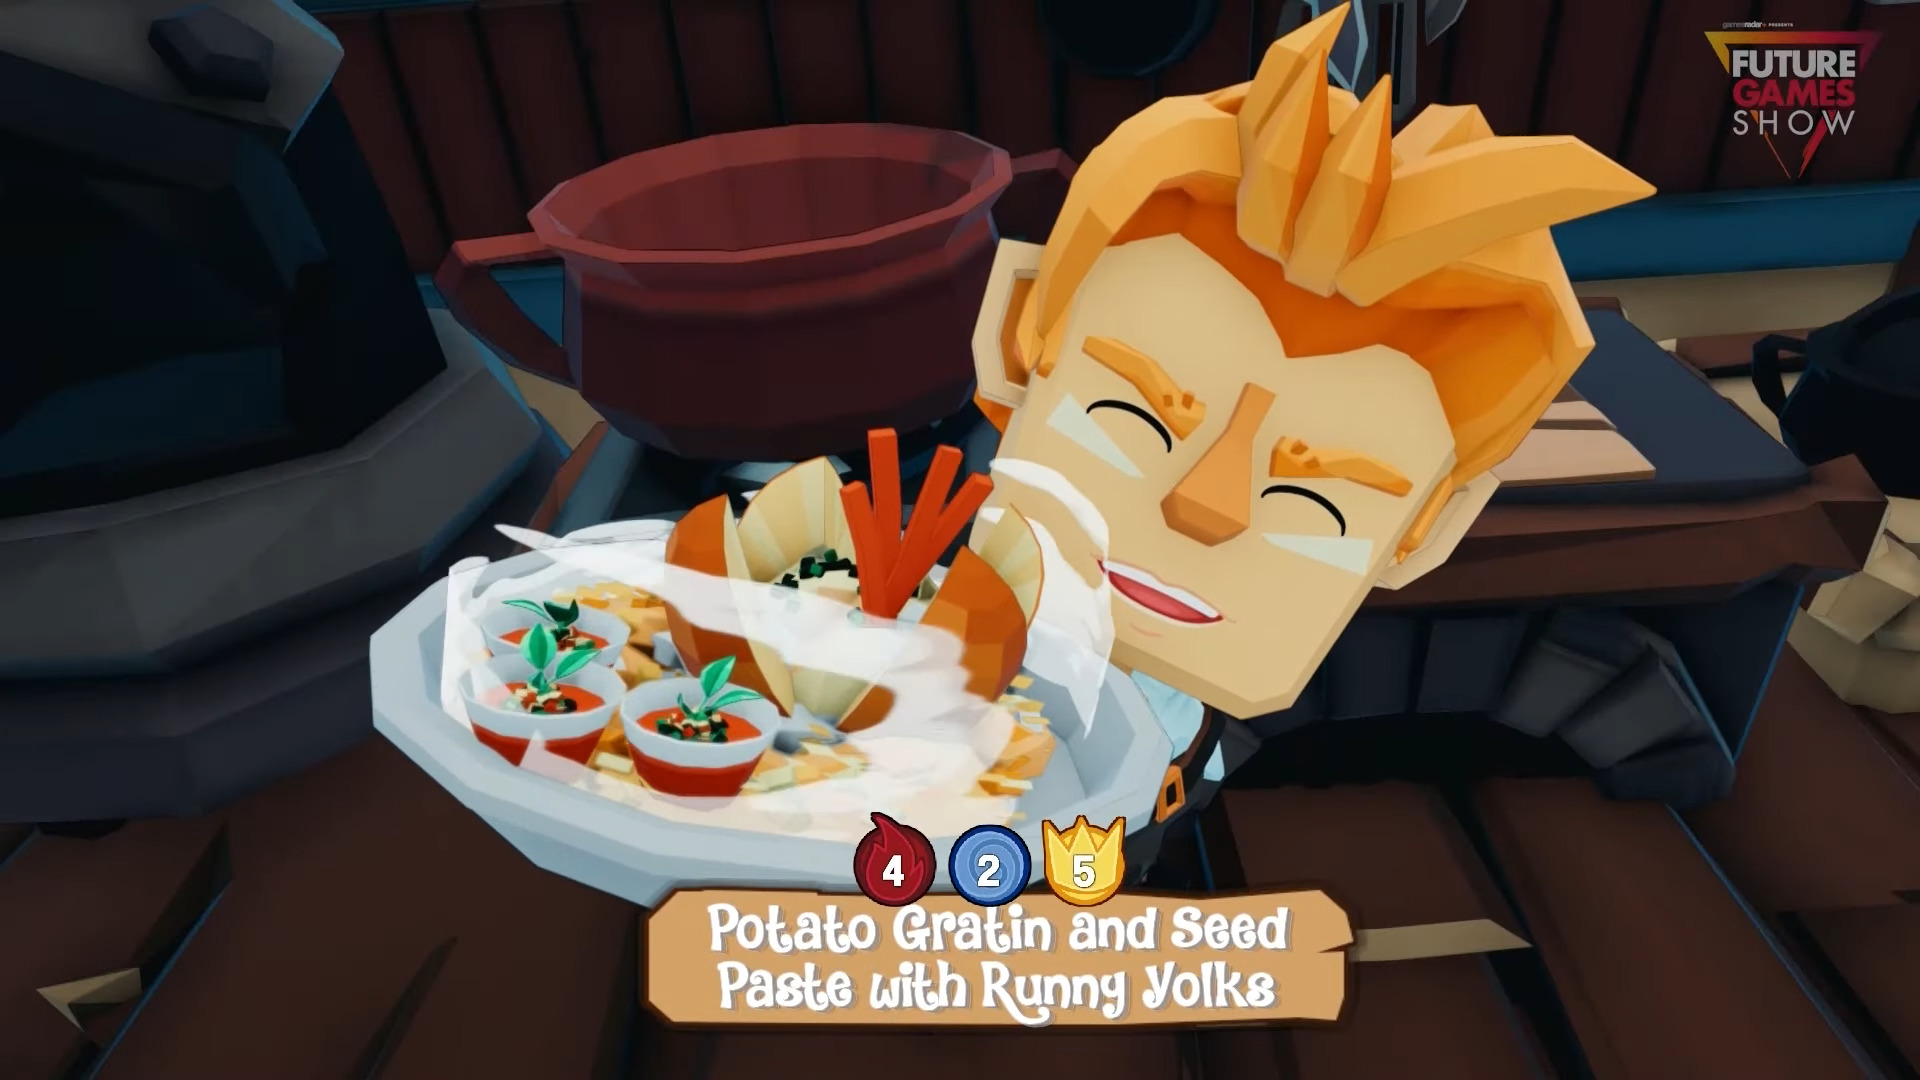 Epic Chef: The Indie Cooking Sim Genre Gets A New Face With Infinigon’s Latest Reveal